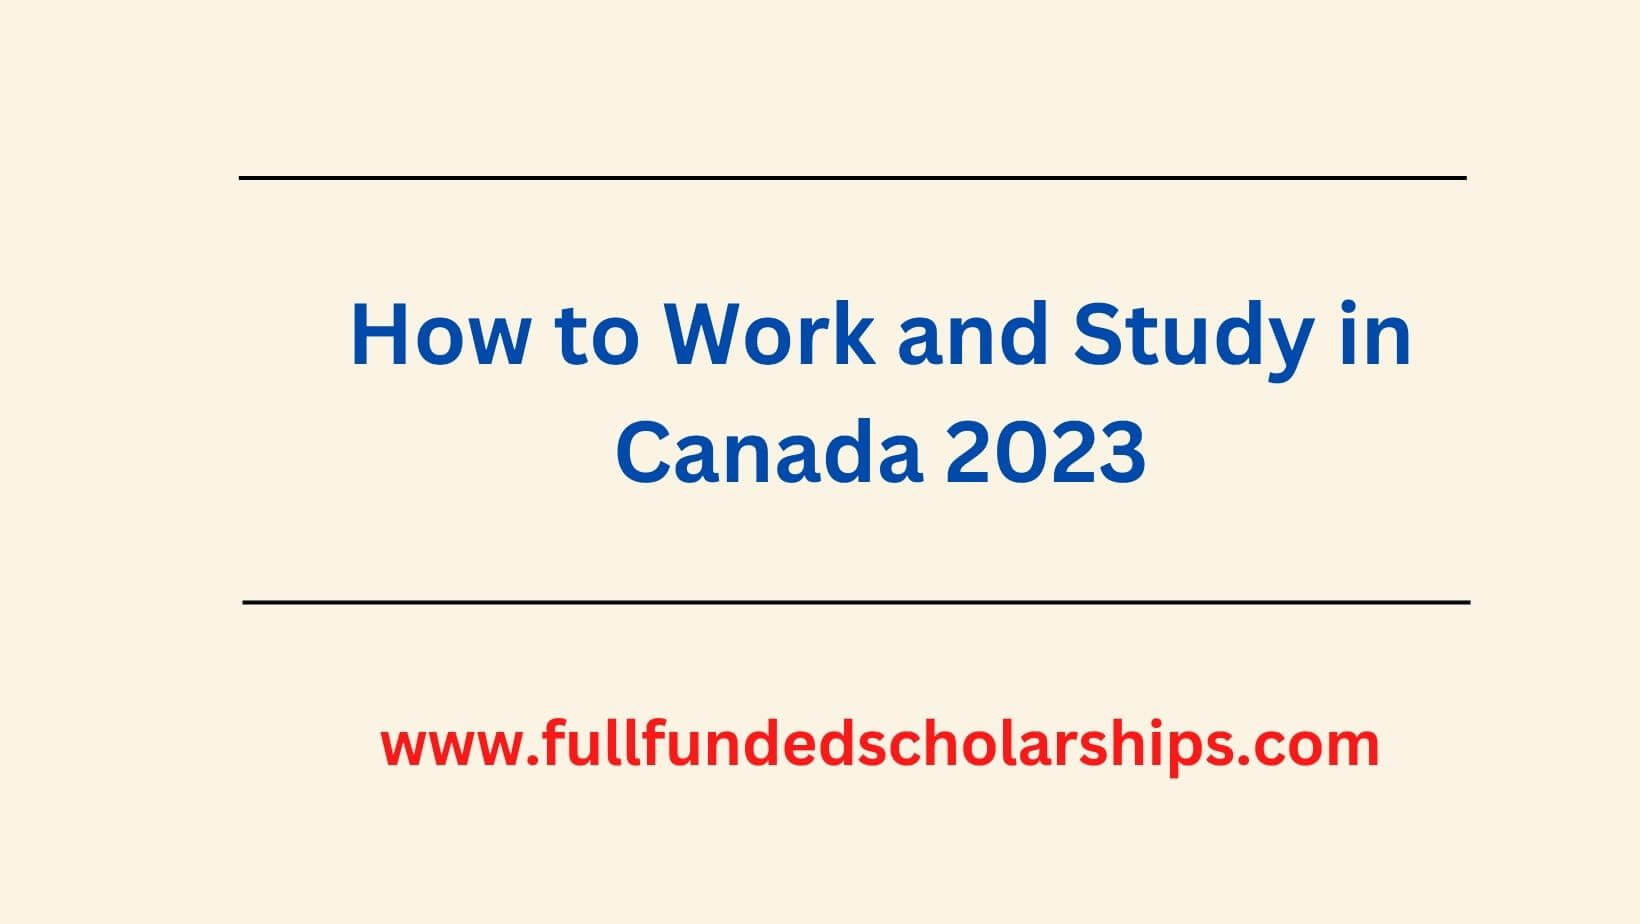 How to Work and Study in Canada 2023